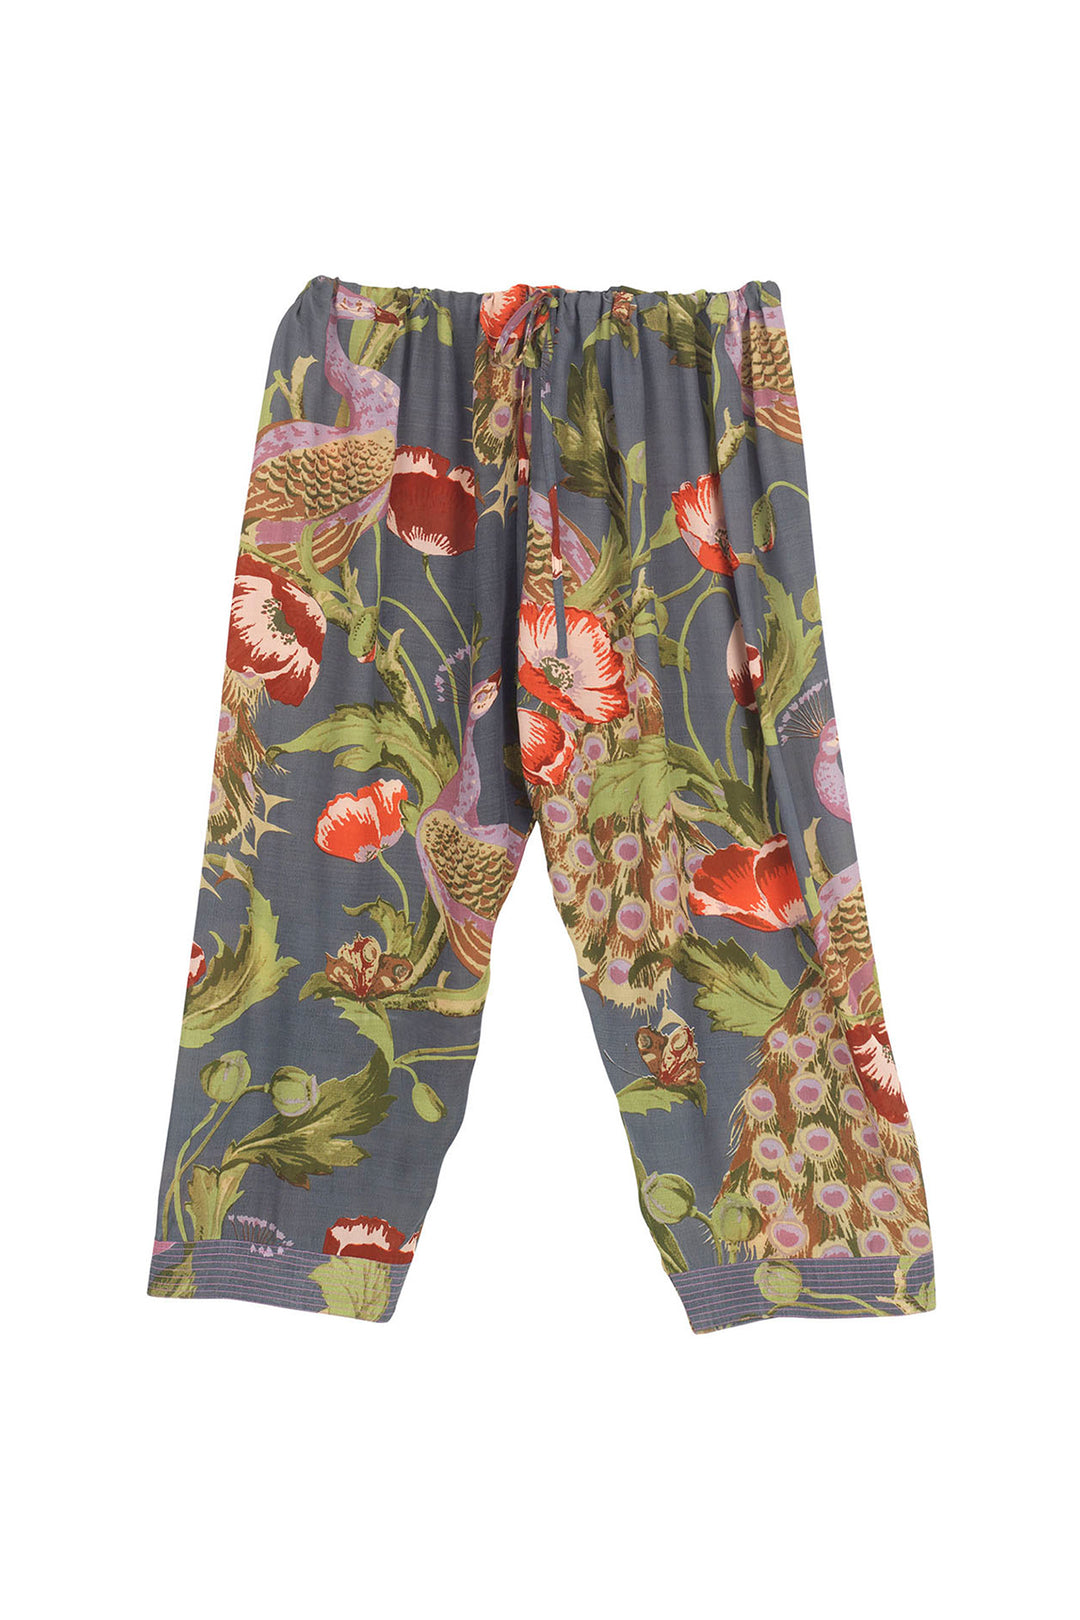 Peacock and Poppies Grey Lounge Pants - One Hundred Stars